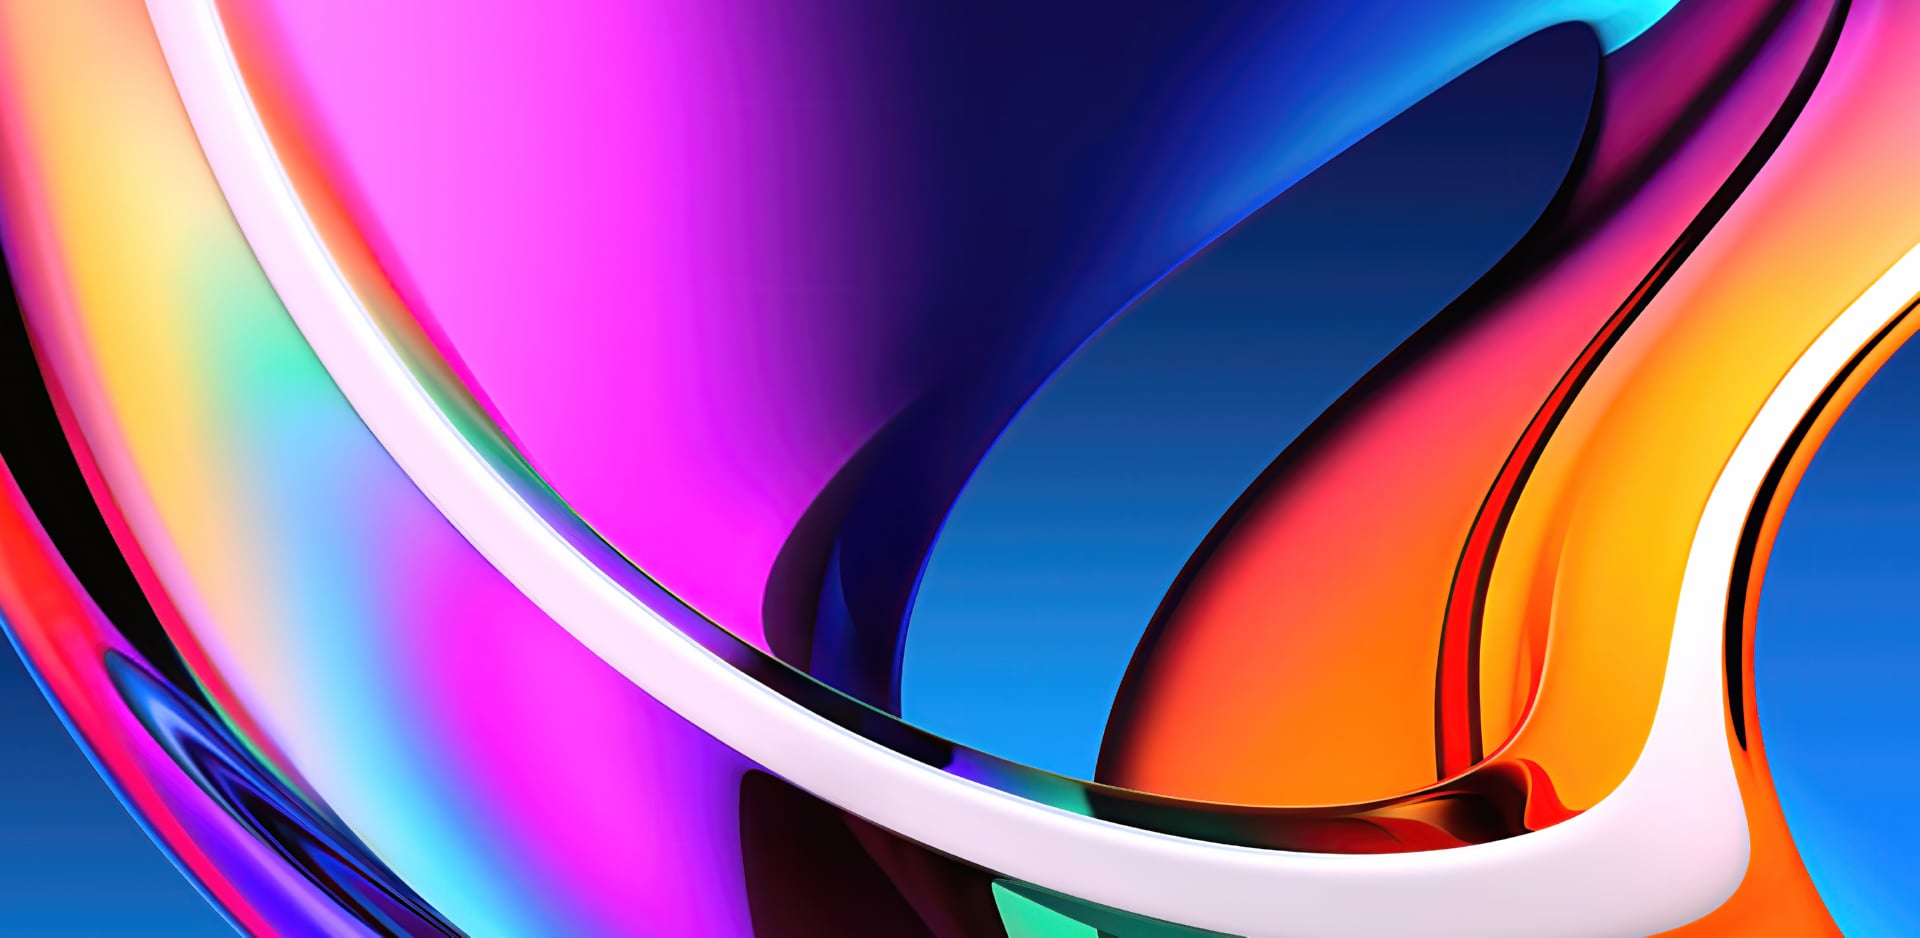 Abstract Apple iMac wallpapers HD quality